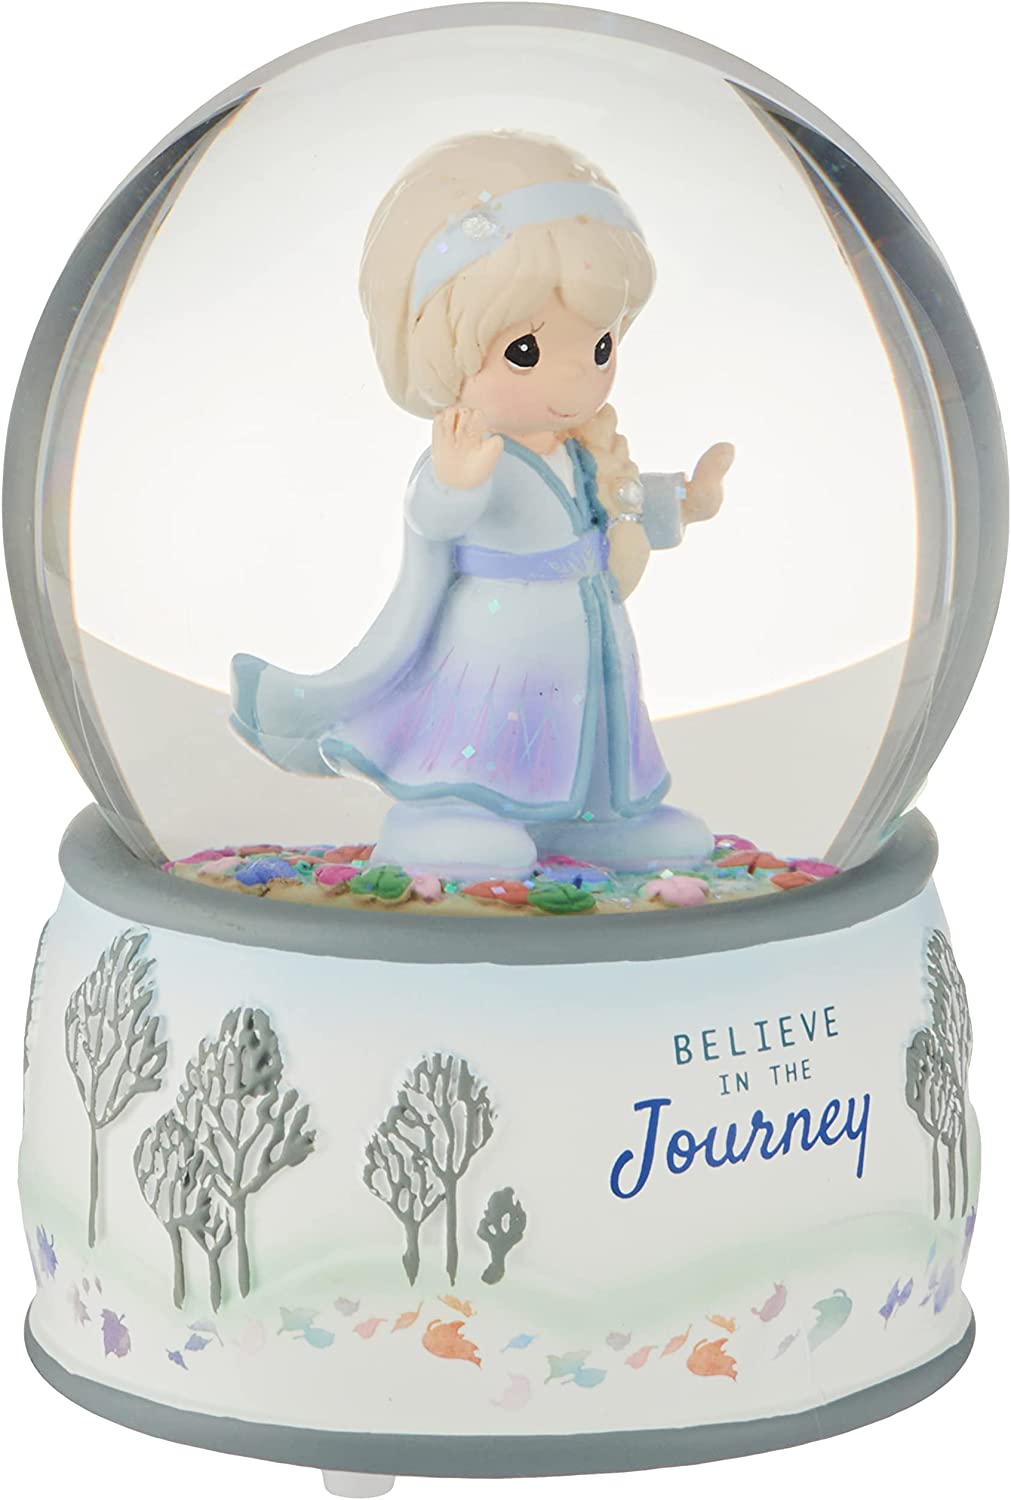 Believe in the Journey Precious Moments Disney Musical Snow/Waterglobe